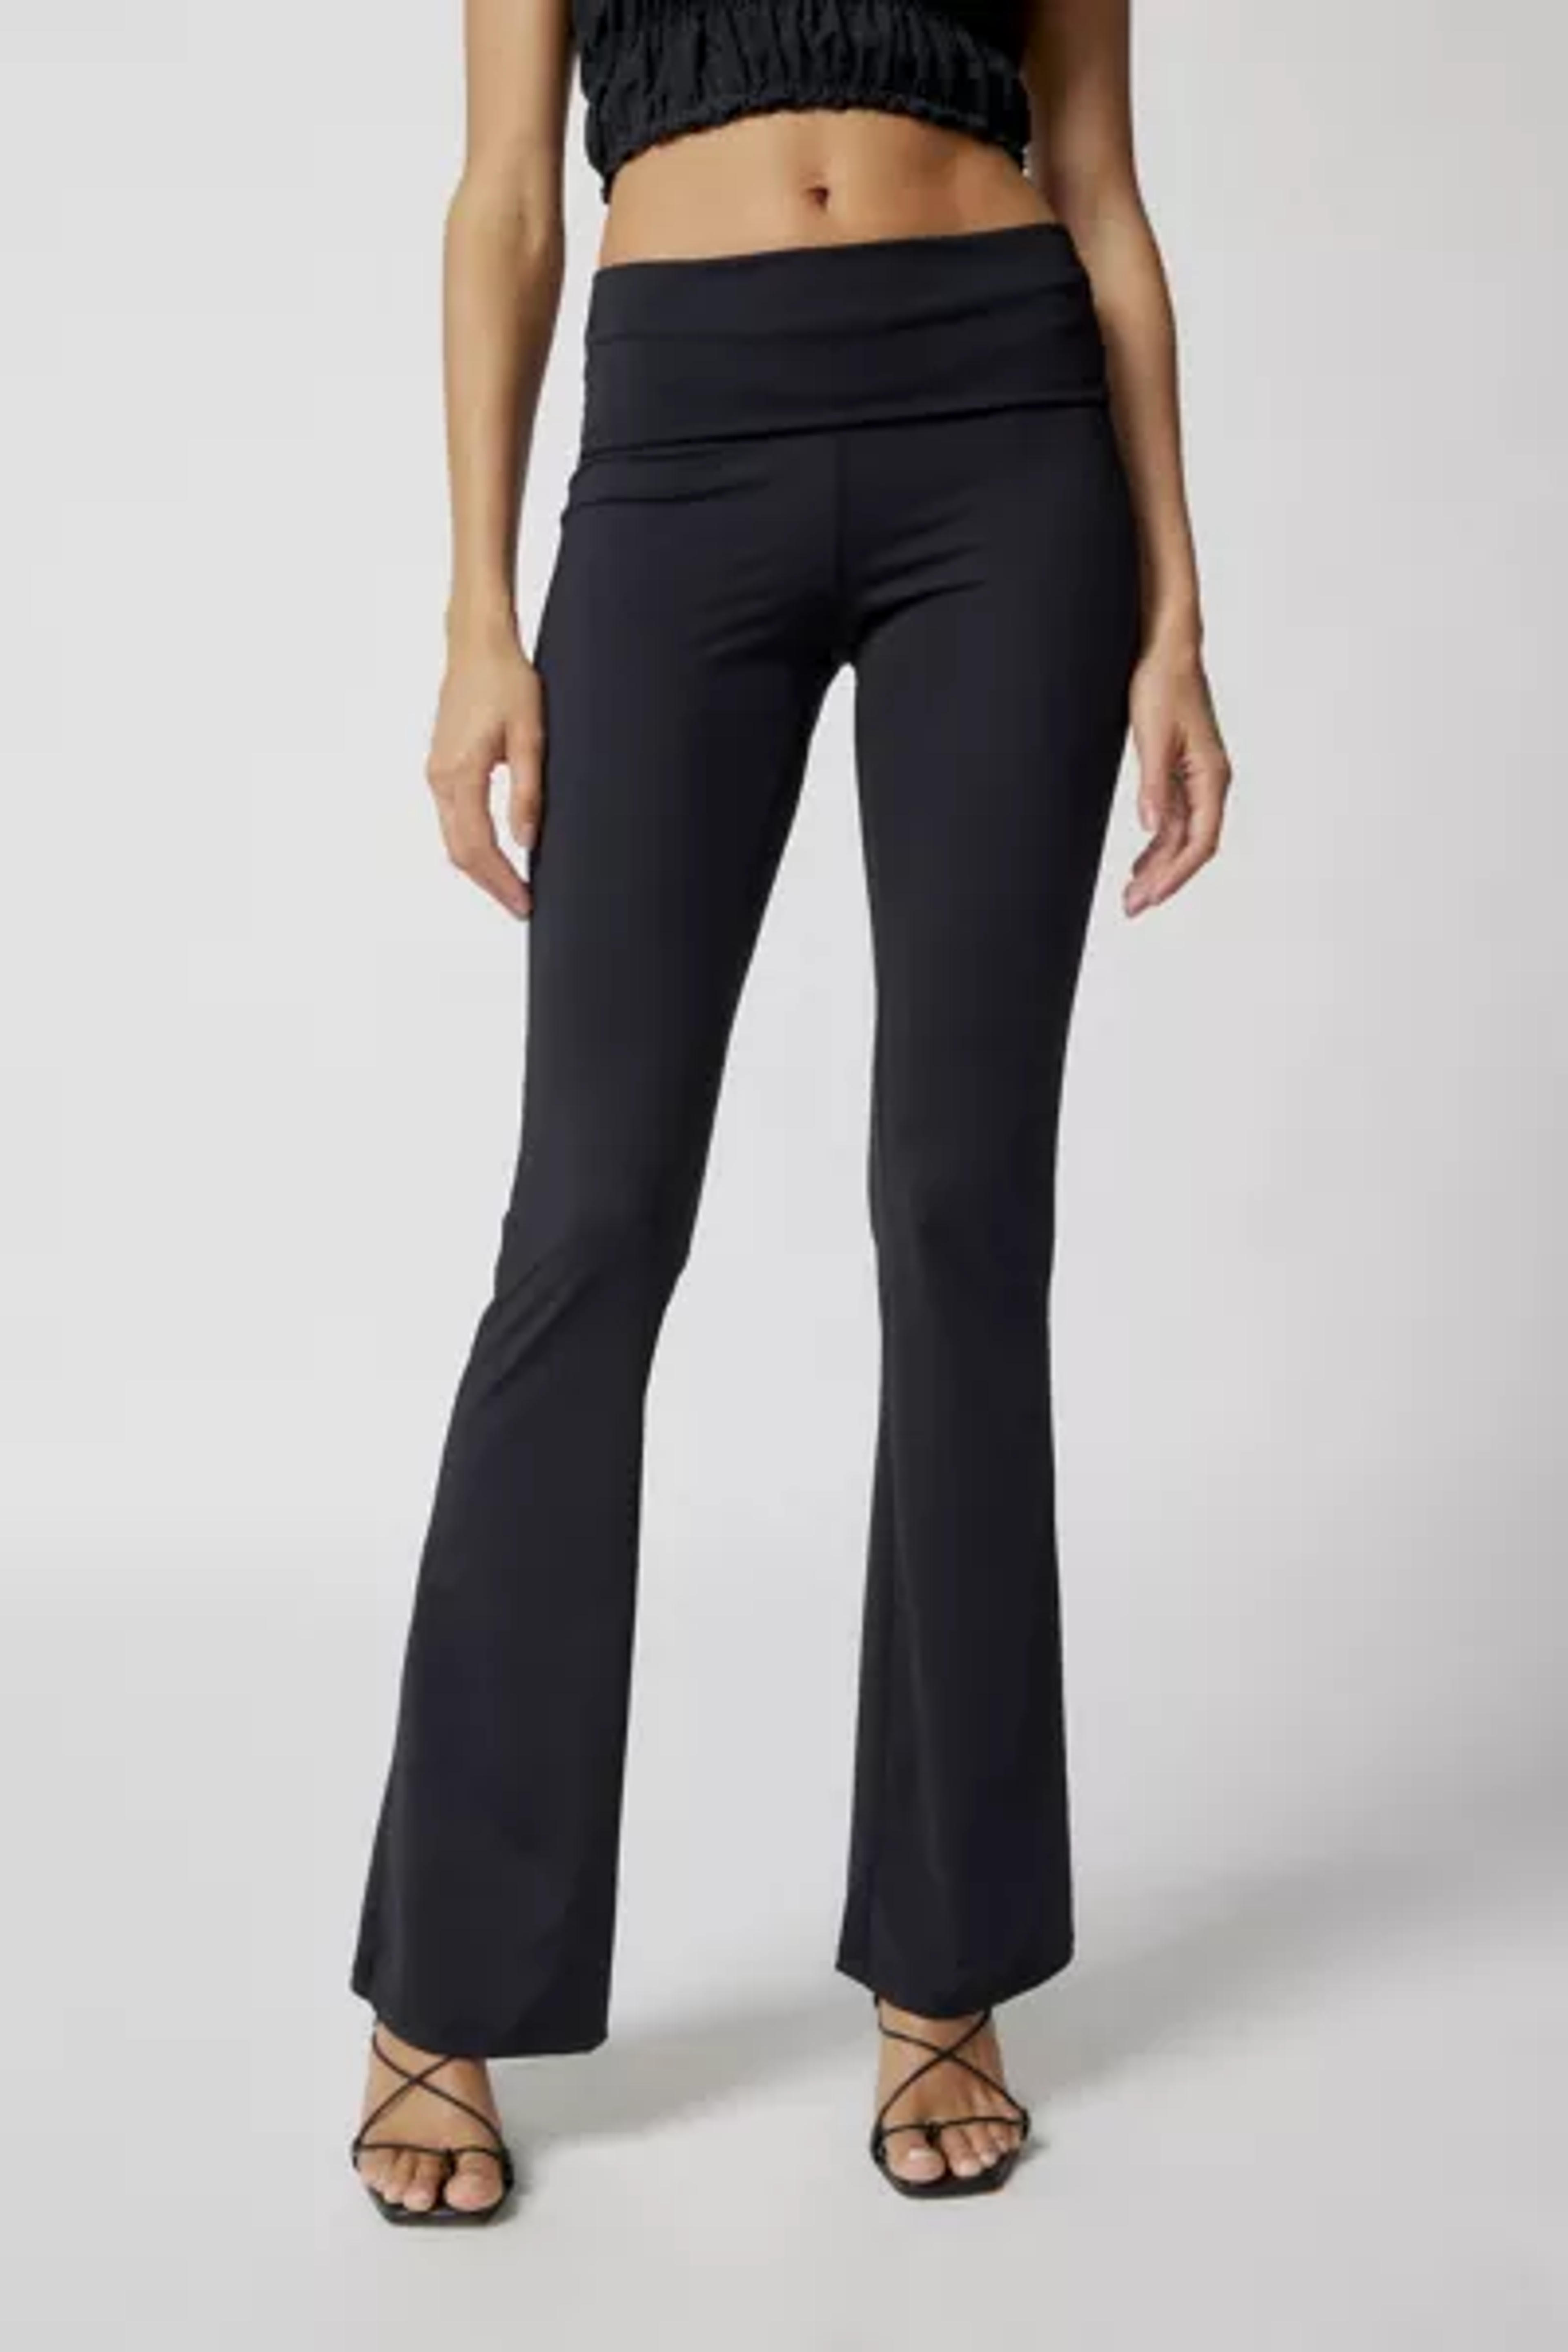 Lioness Amelie Low-Rise Pant | Urban Outfitters